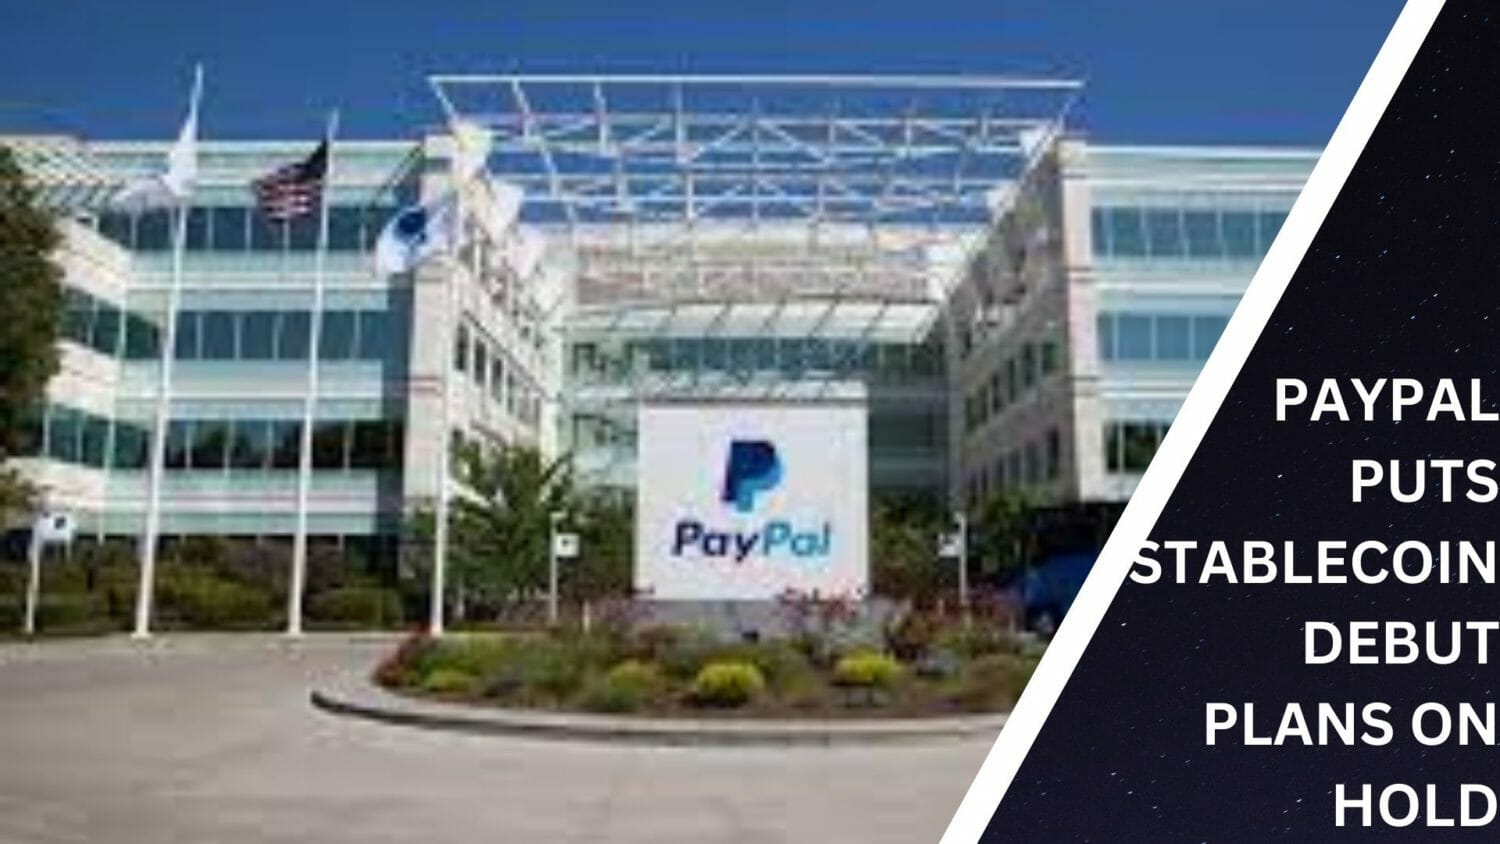 Paypal Puts Stablecoin Debut Plans On Hold